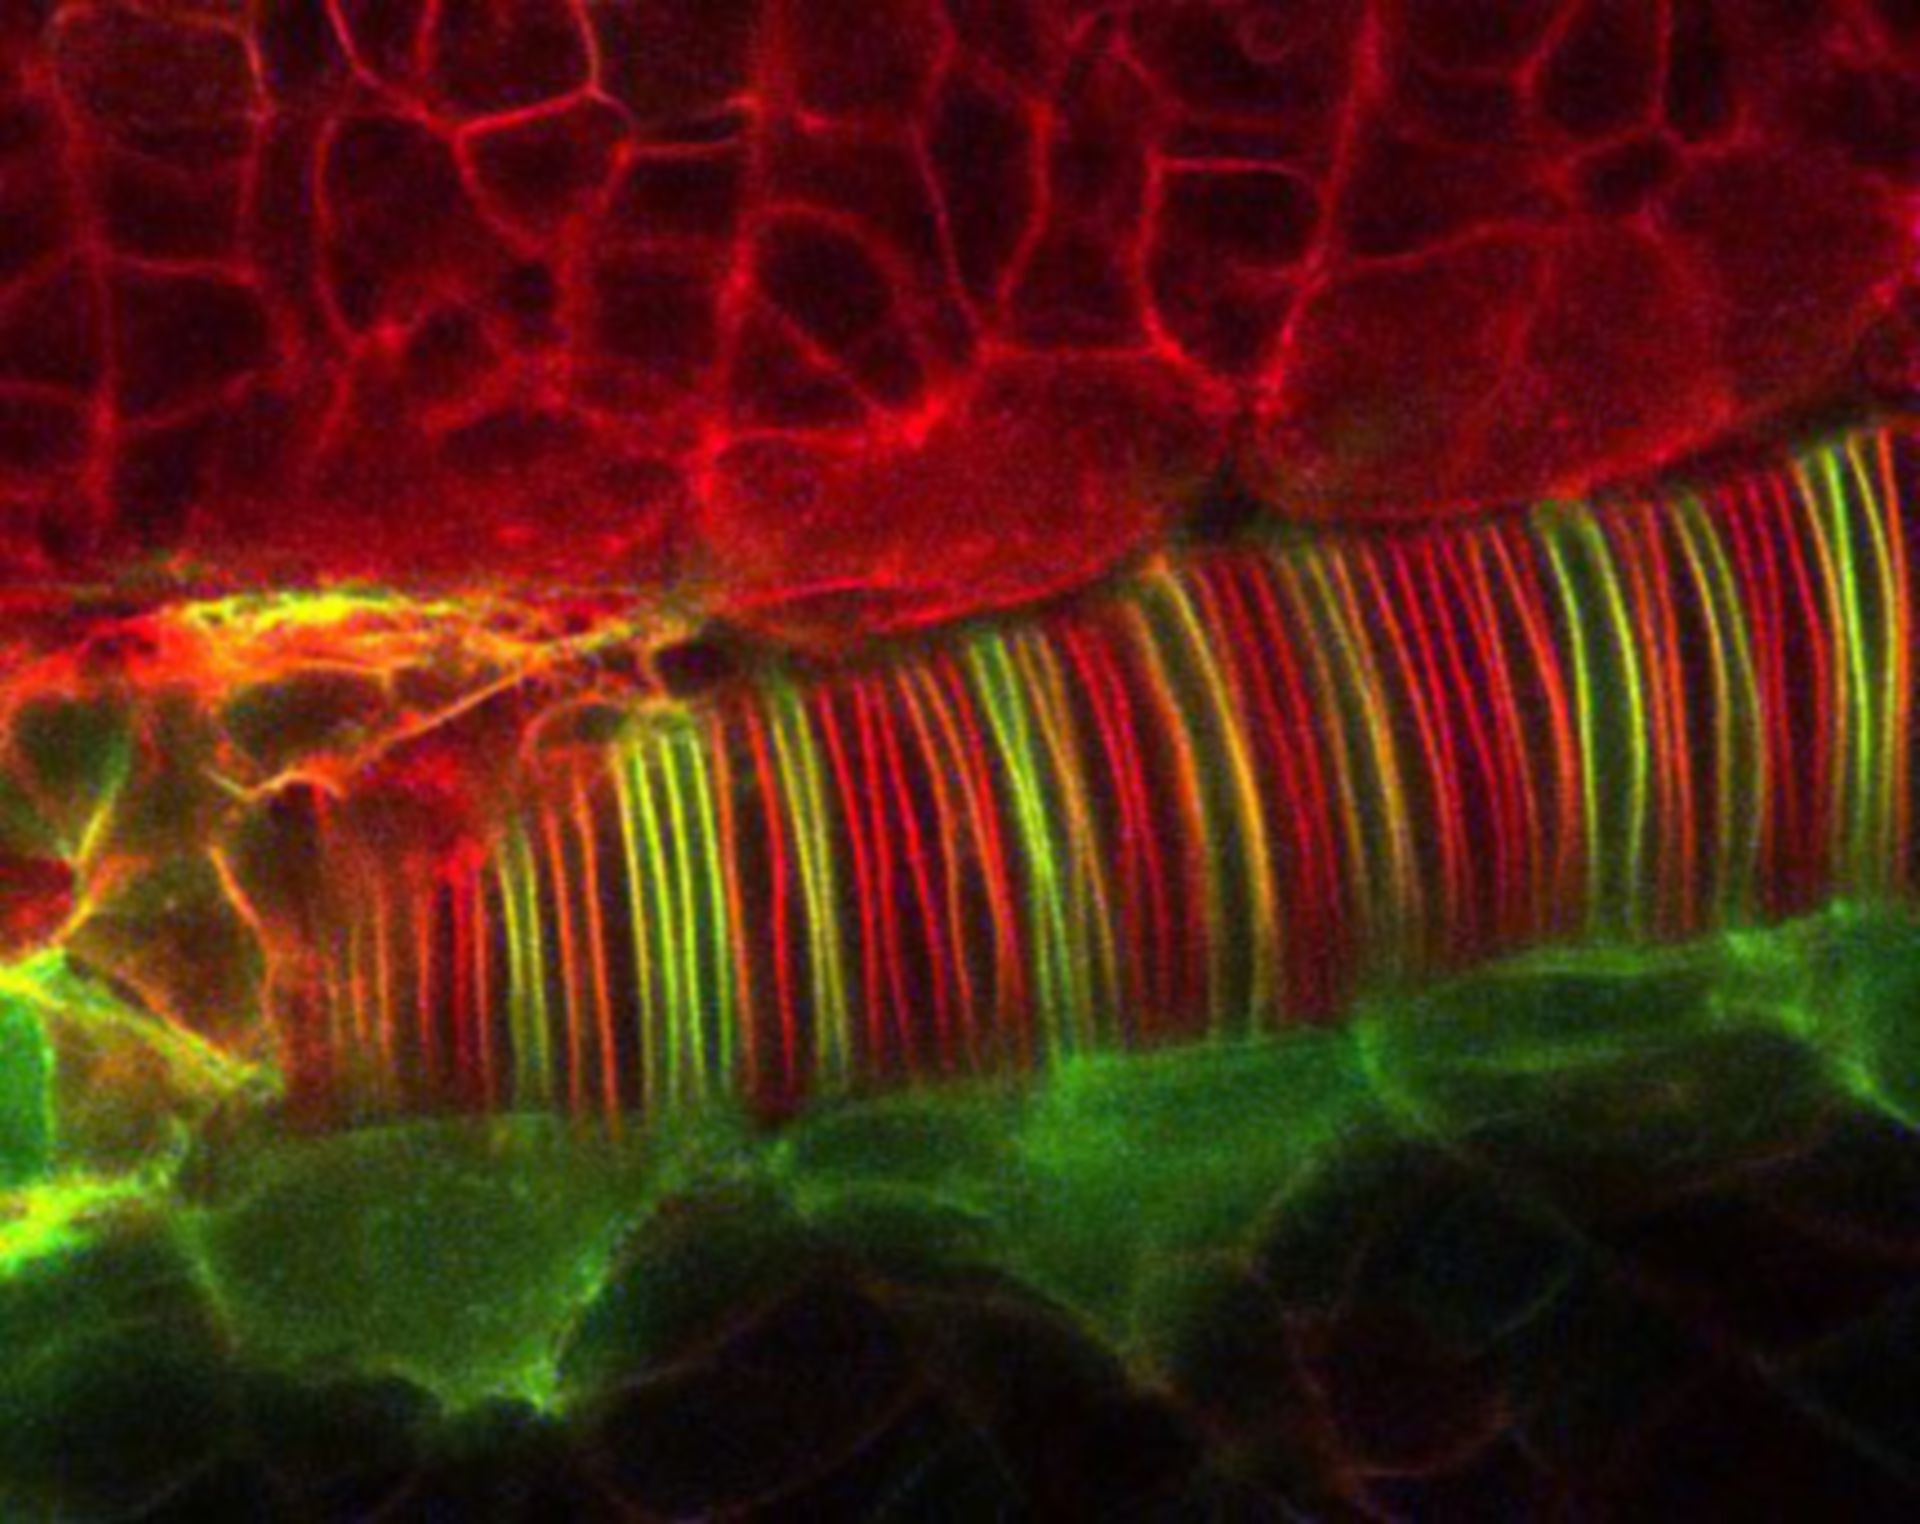 Neural Tube! - Image of the Week - June 1, 2015 - CIL:215